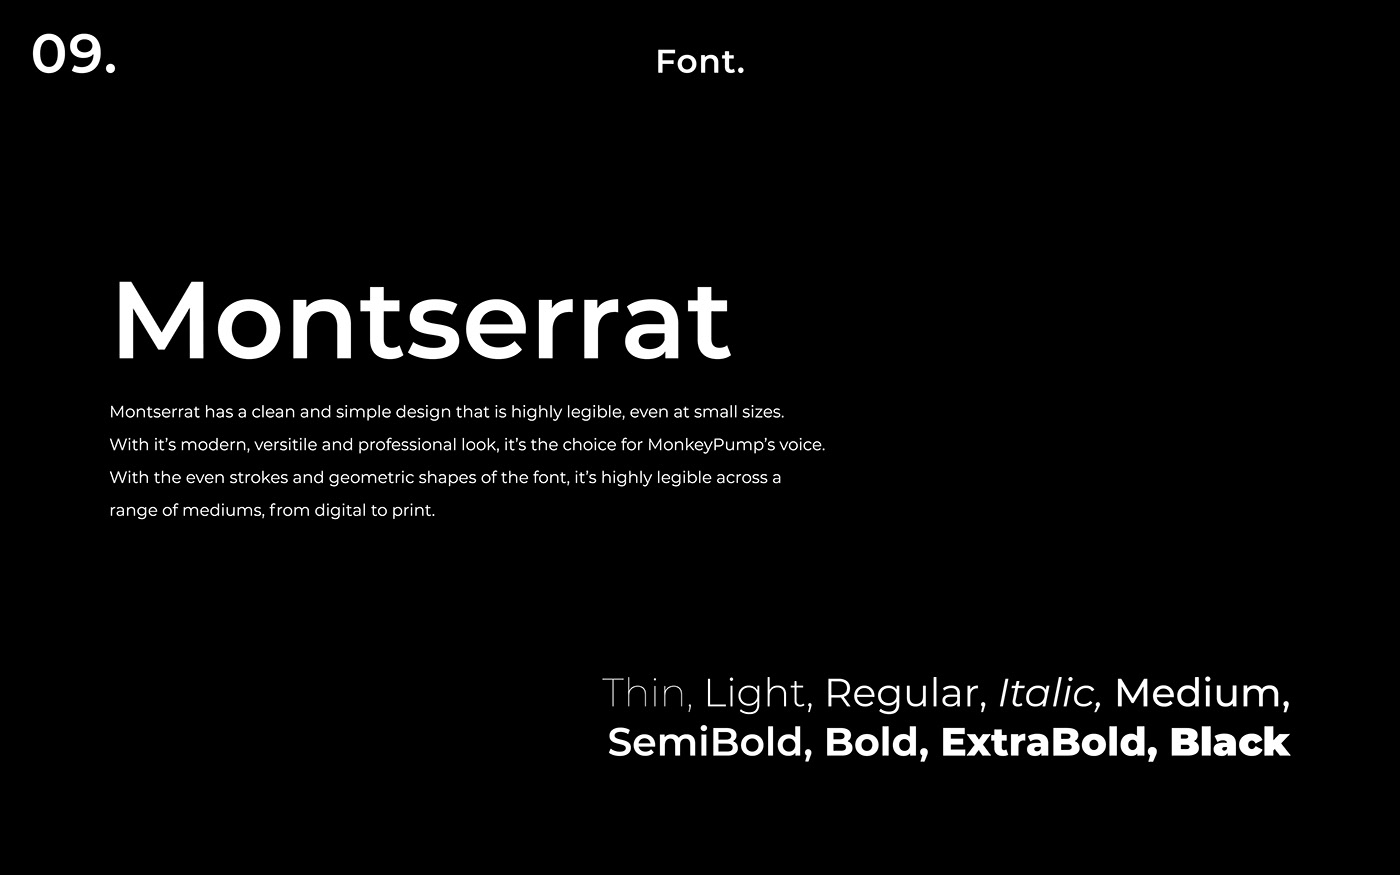 Image showing Montserat with an explanation of why this was chosen as the brand font.